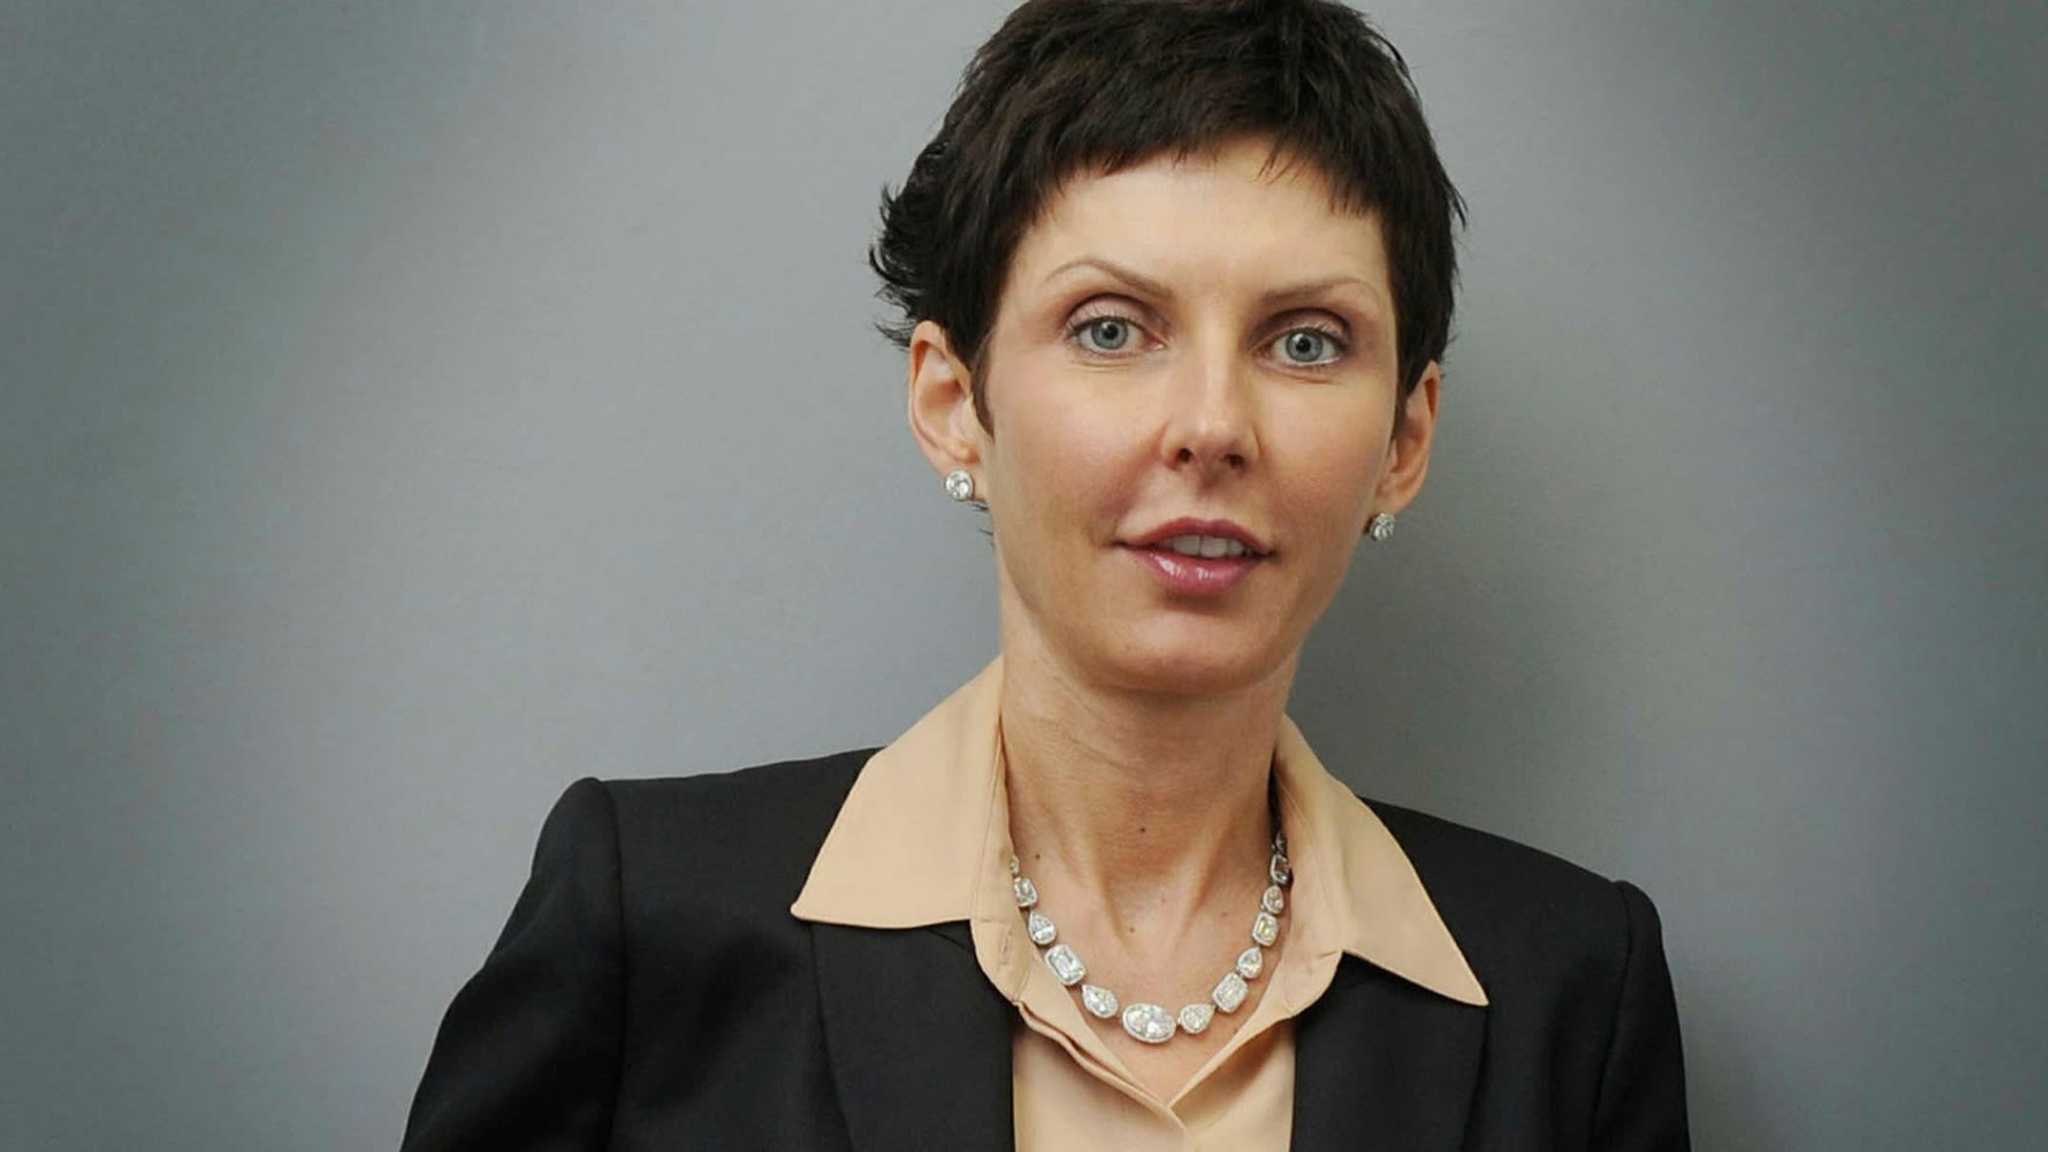 Bet365 chief Denise Coates has her pay cut for first time in 3 years | Financial Times